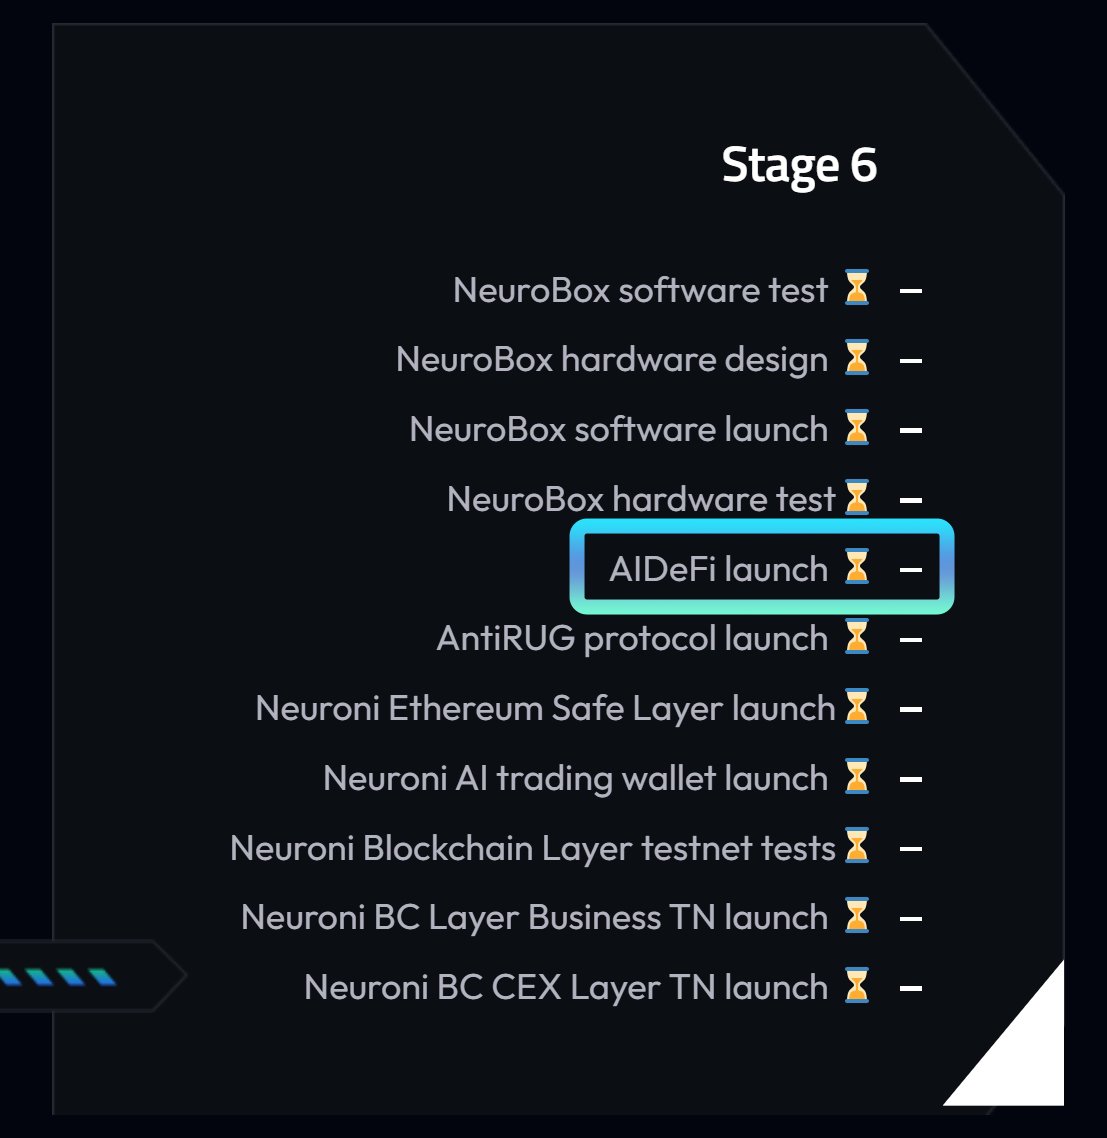 Dear Neuronians, We're eager to share with you an explanation of a step in stage 6 of our roadmap (neuroni.ai/#roadmap): The AIDeFi What exactly is AIDeFi? It's an innovative blend of Artificial Intelligence (#AI) with Decentralized Finance (#DeFi), which may sound